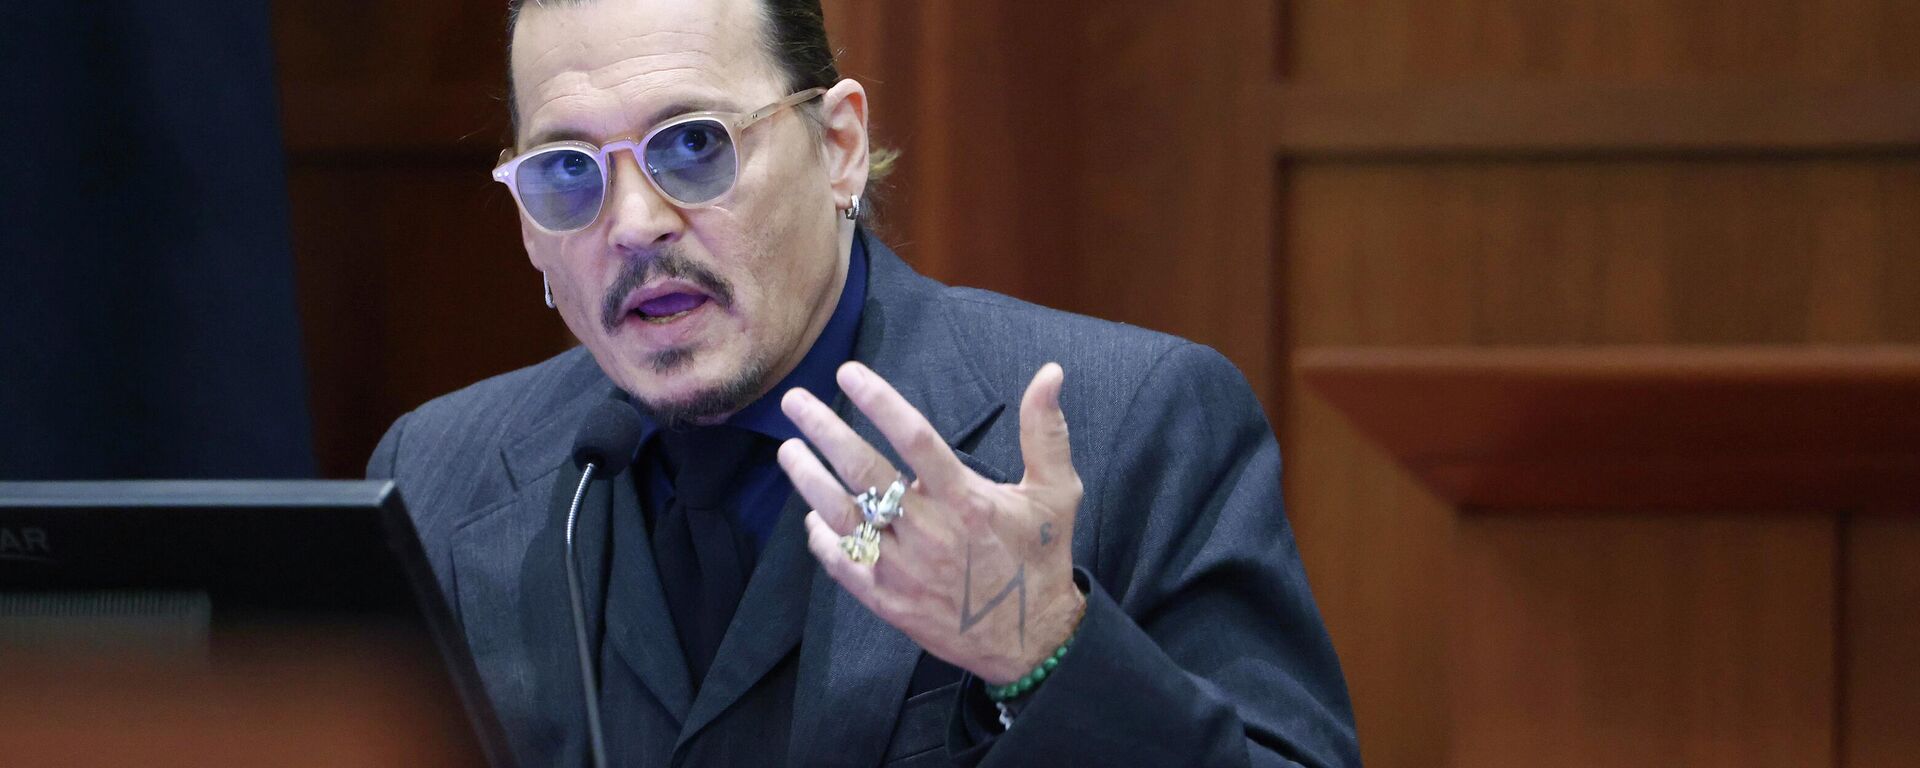 Actor Johnny Depp testifies in the courtroom at the Fairfax County Circuit Court in Fairfax, Va., Thursday, April 21, 2022 - Sputnik International, 1920, 22.04.2022